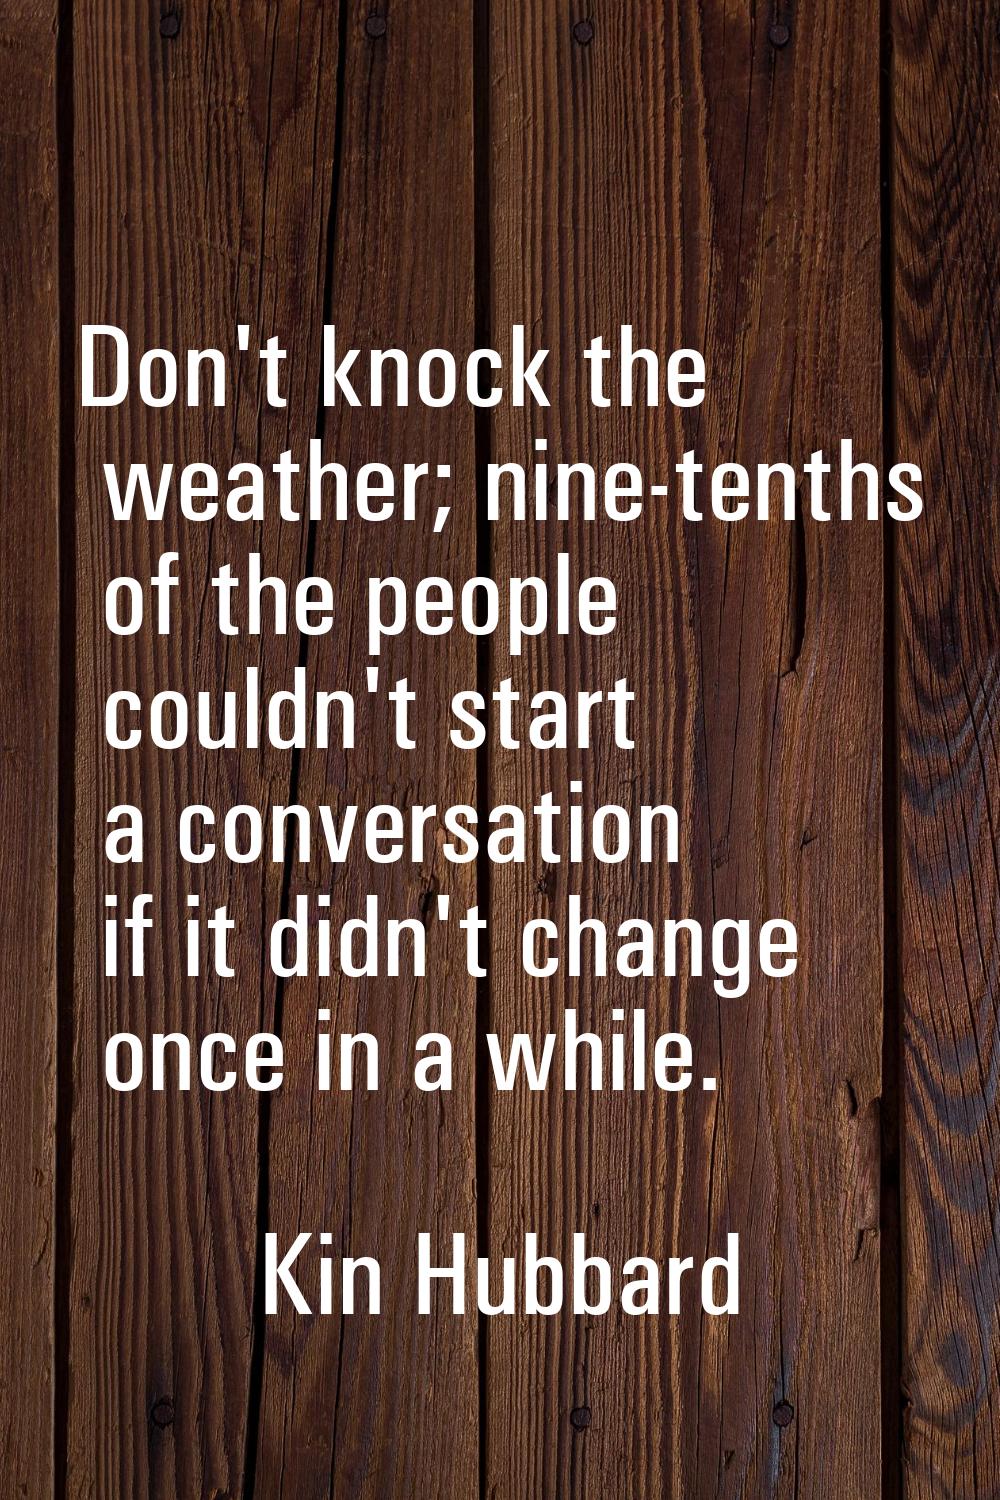 Don't knock the weather; nine-tenths of the people couldn't start a conversation if it didn't chang